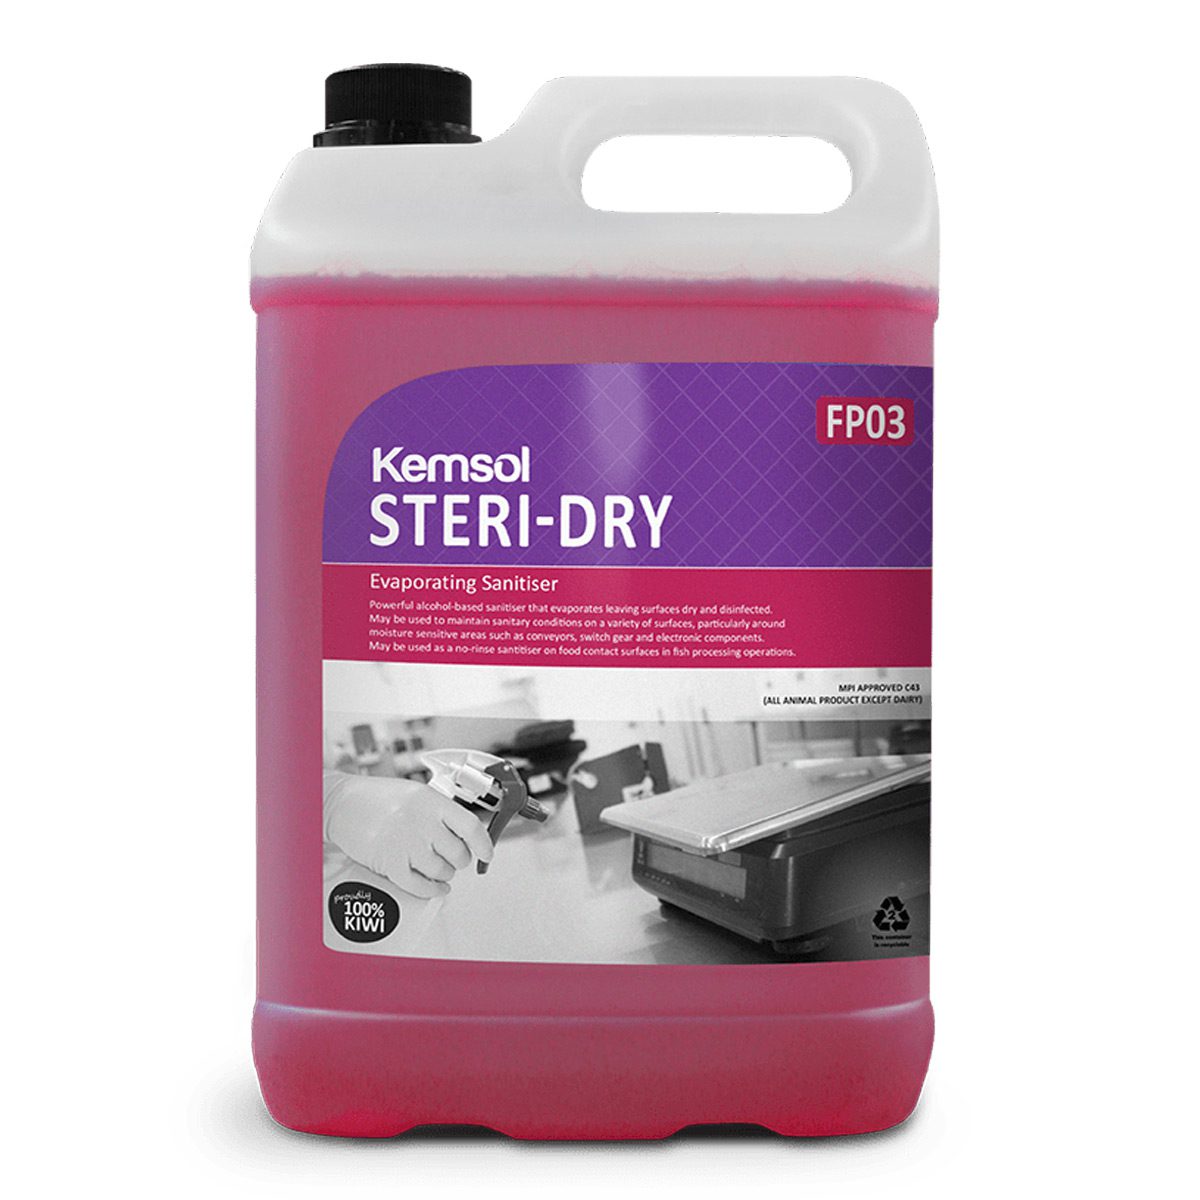 cleaning-products-disinfectants-and-sanitisers-kemsol-steri-dry-evaporating-sanitiser-5L-litre-alcohol-based-no-rinse-sanitiser-food-contact-surfaces-fish-processing-operations-vjs-distributors-KSTERI